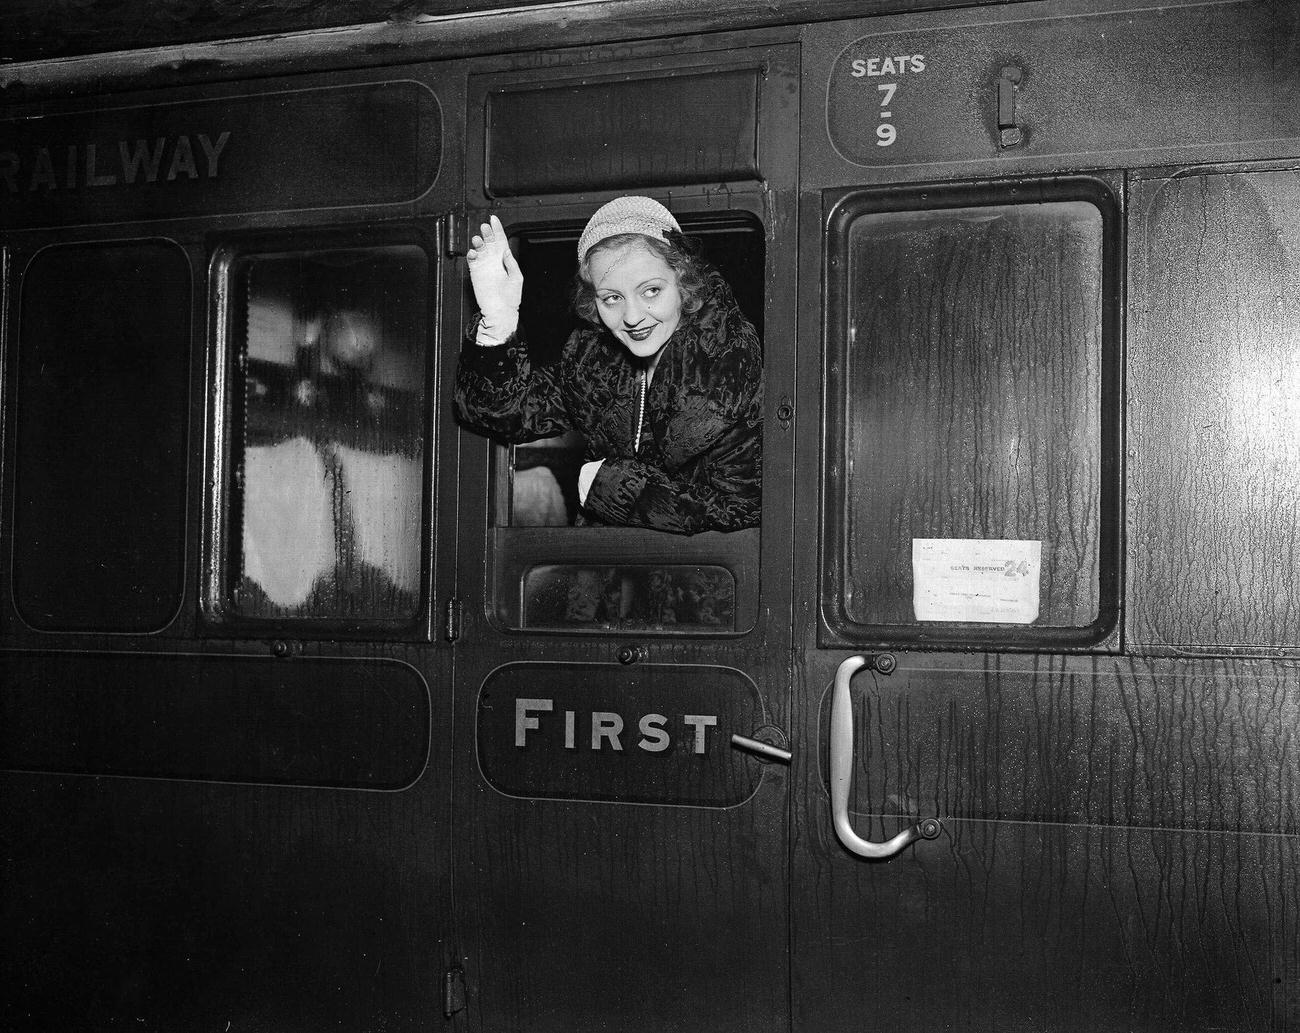 American actress Miss Tallulah Bankhead pictured waving as she leaves Waterloo Station on a train, en route for the USA, 1931